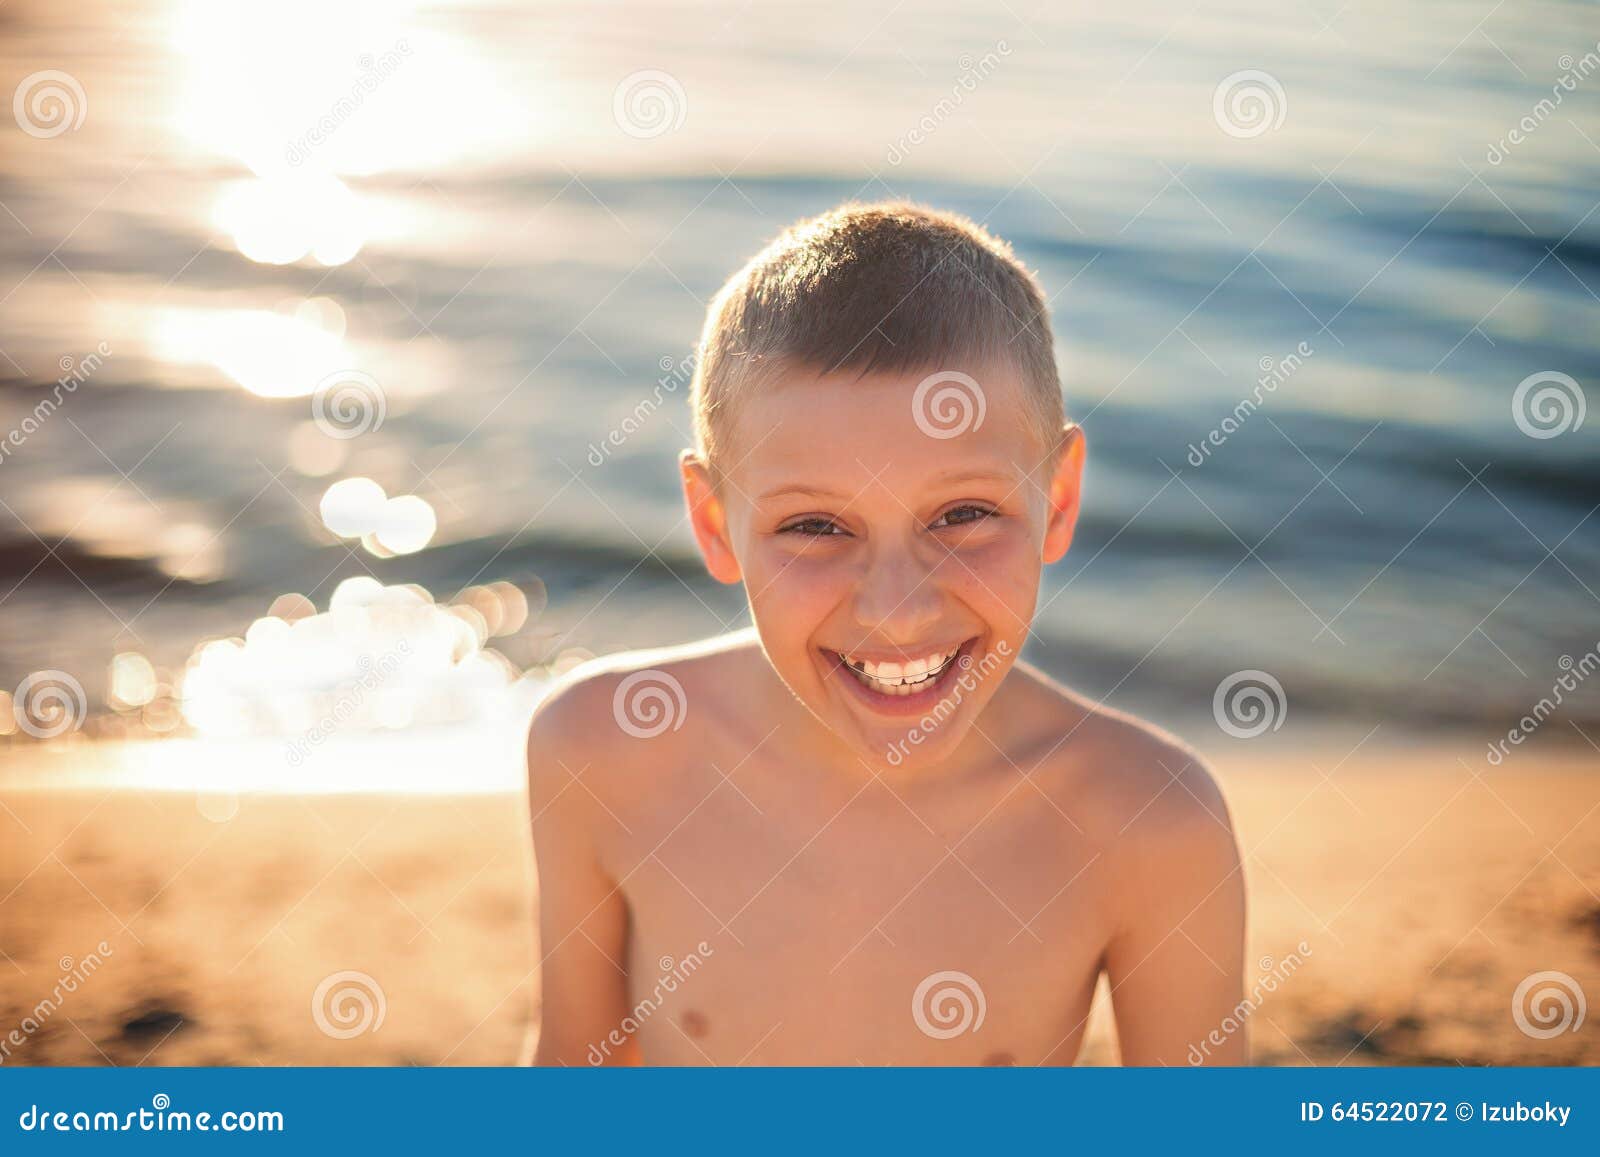 Child Boy Happy Smile with Teeth Braces Stock Photo - Image of natural ...